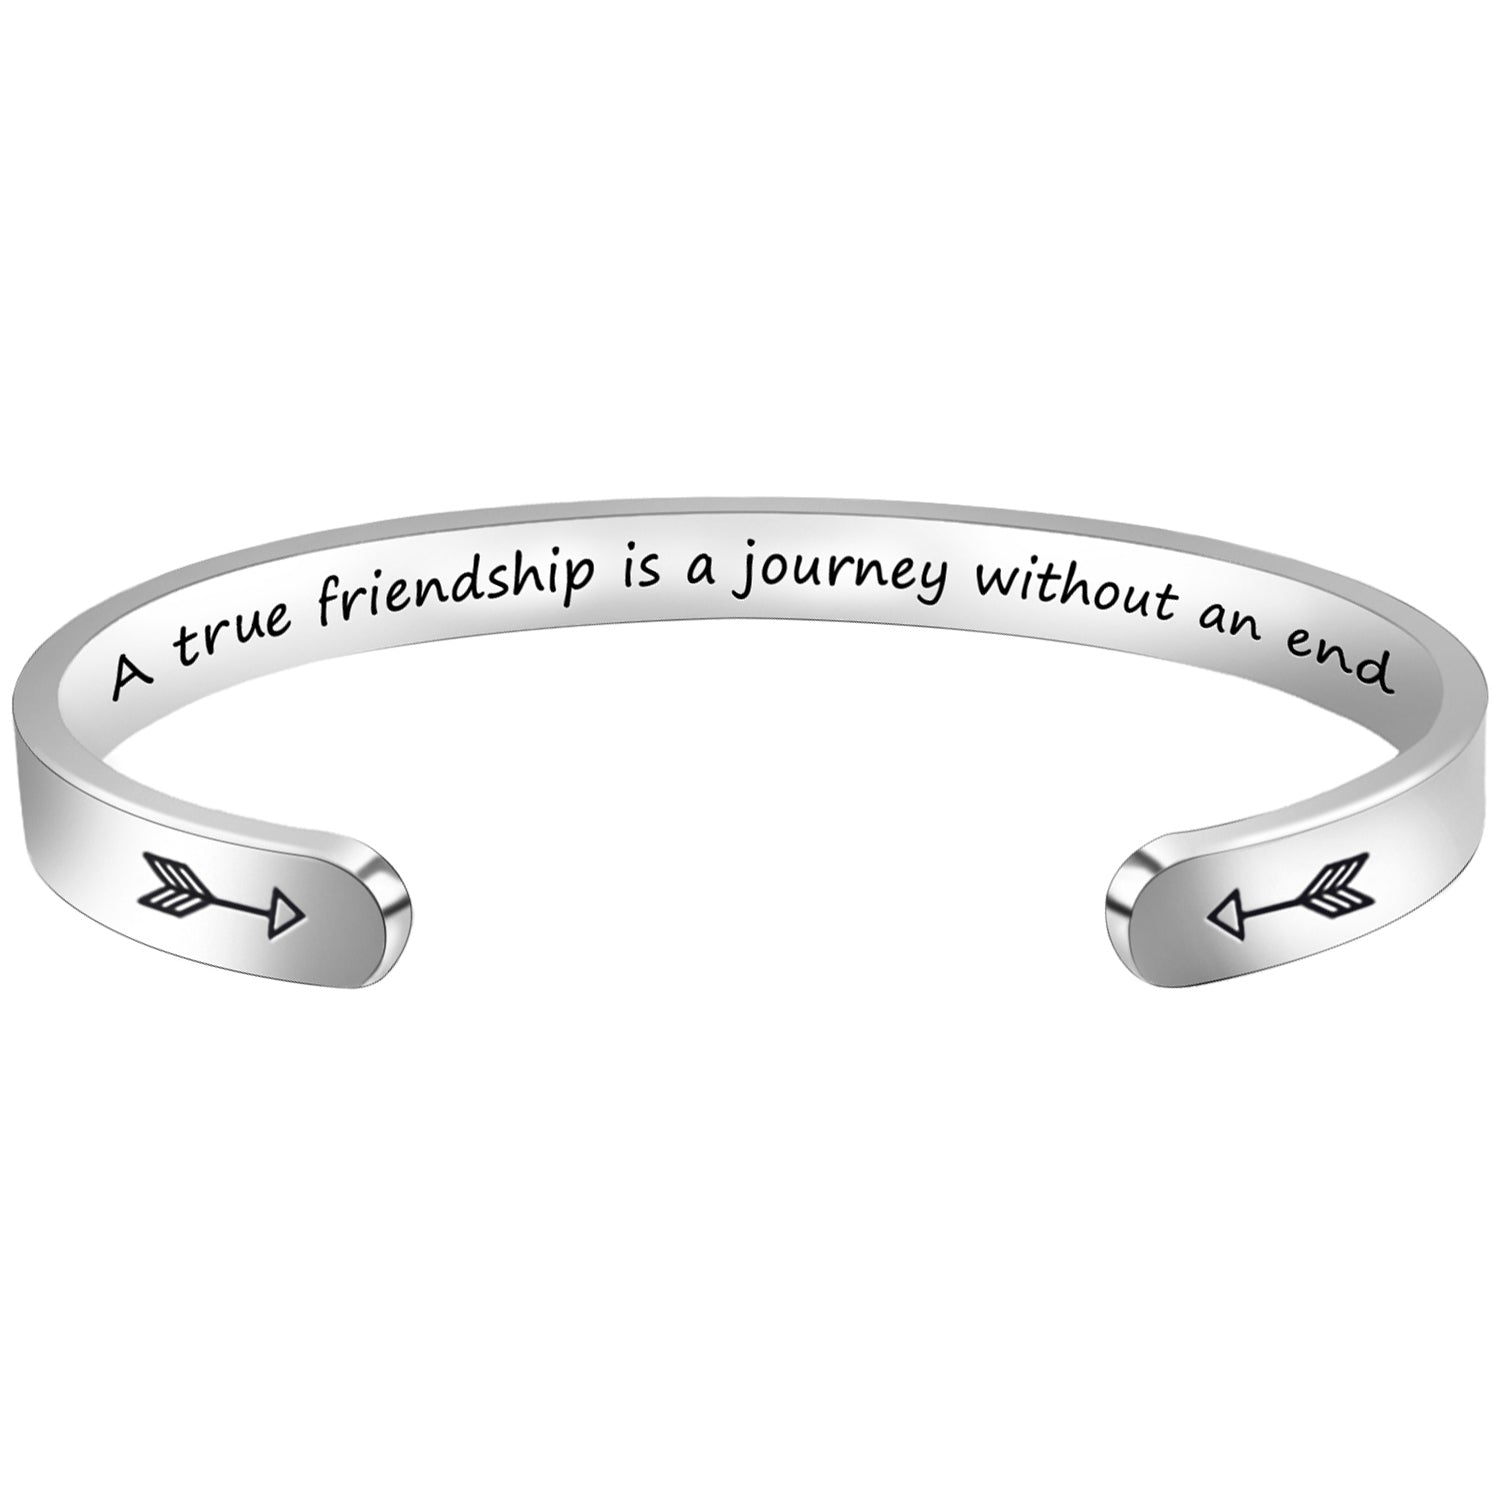 A true friendship is a journey without an end